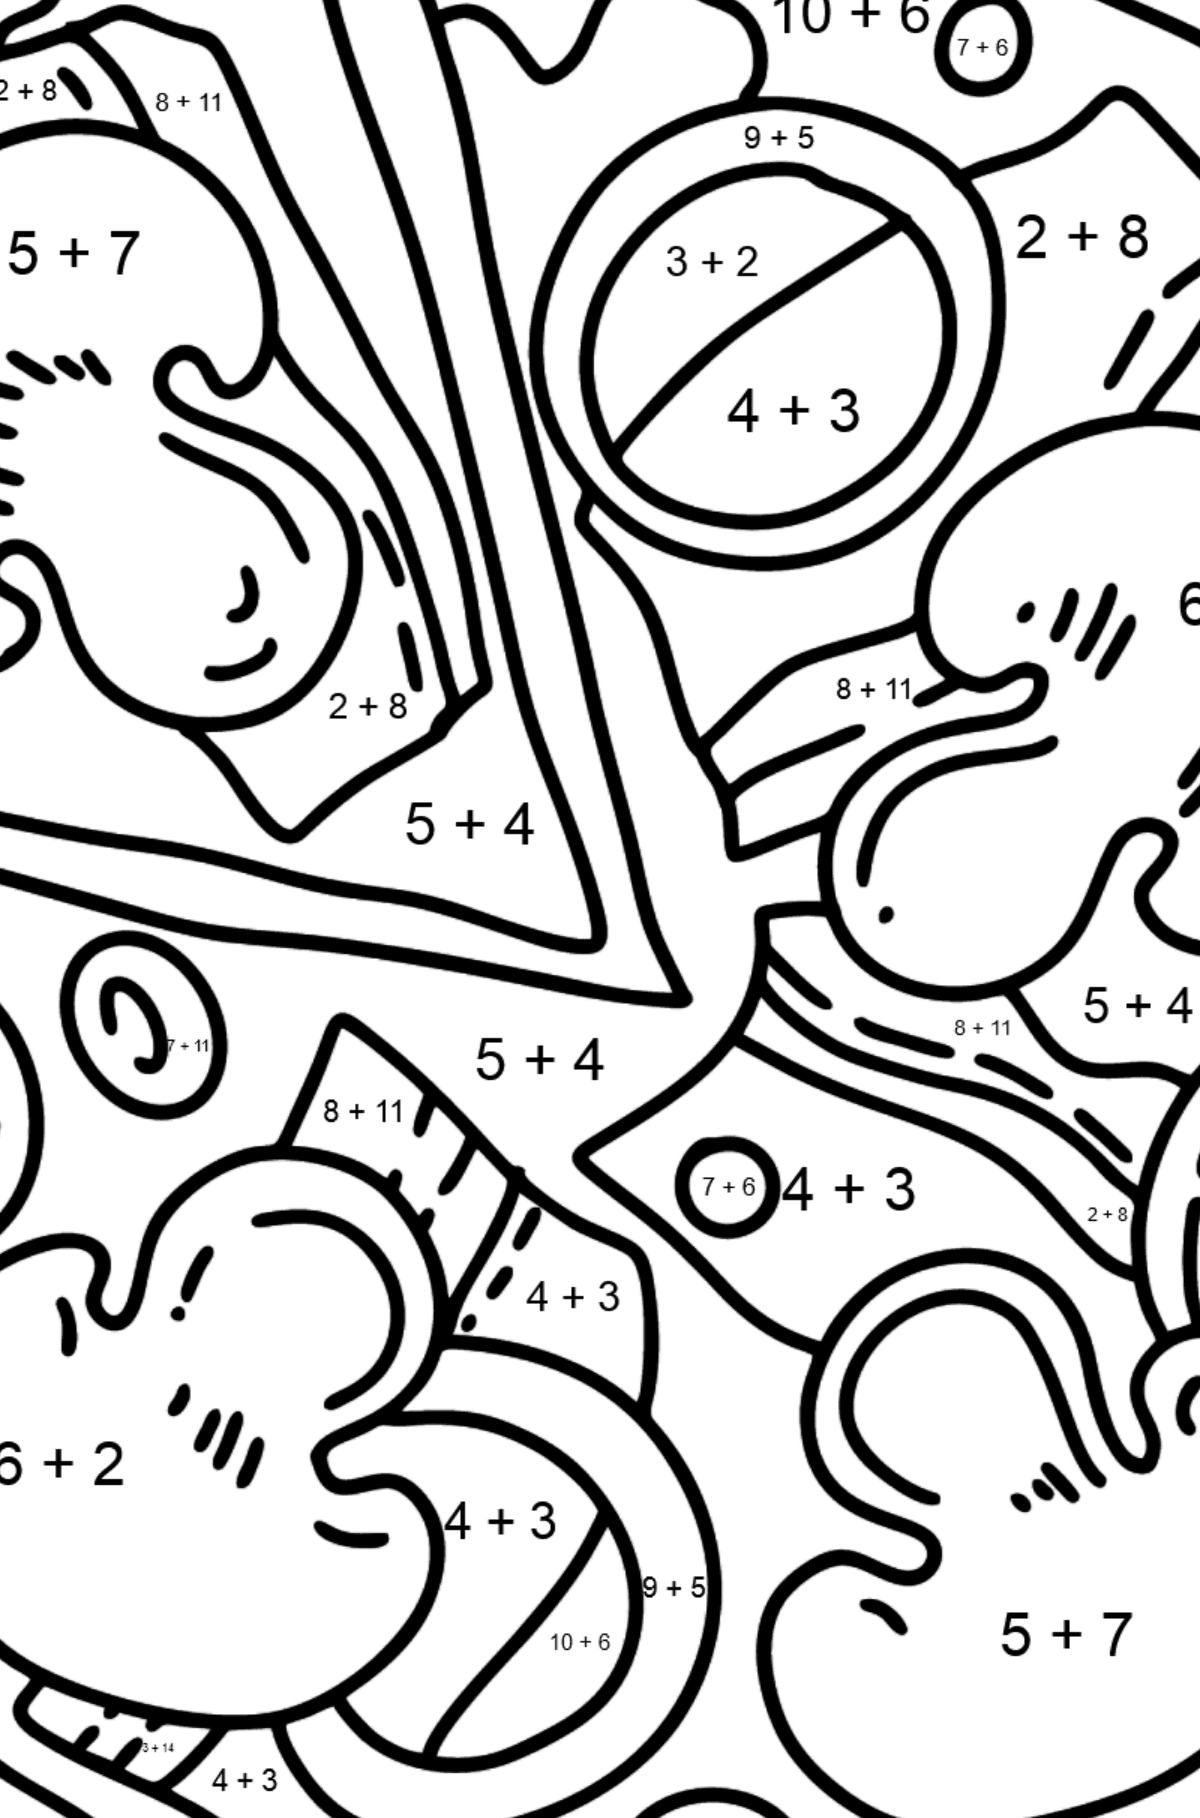 Pizza with Mushrooms coloring page - Math Coloring - Addition for Kids